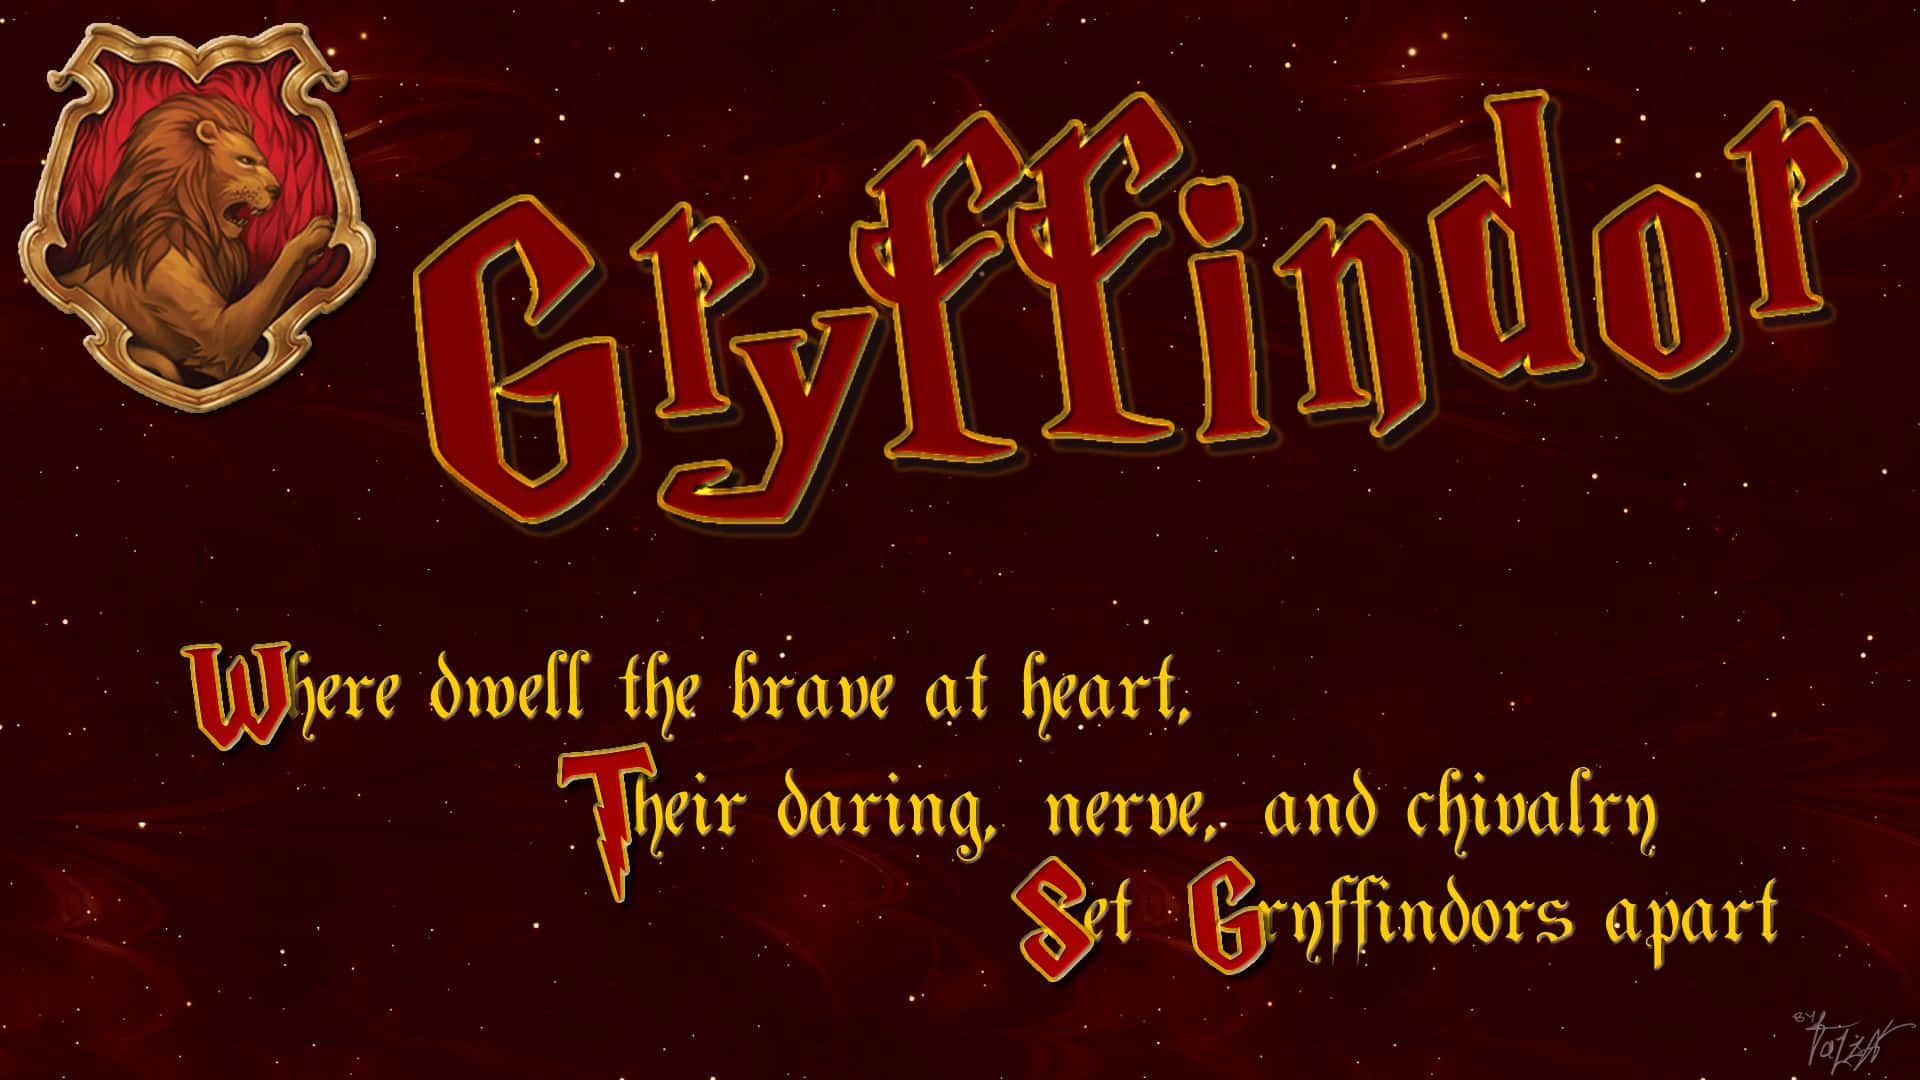 "Courage and Daring: The Gryffindor Way"